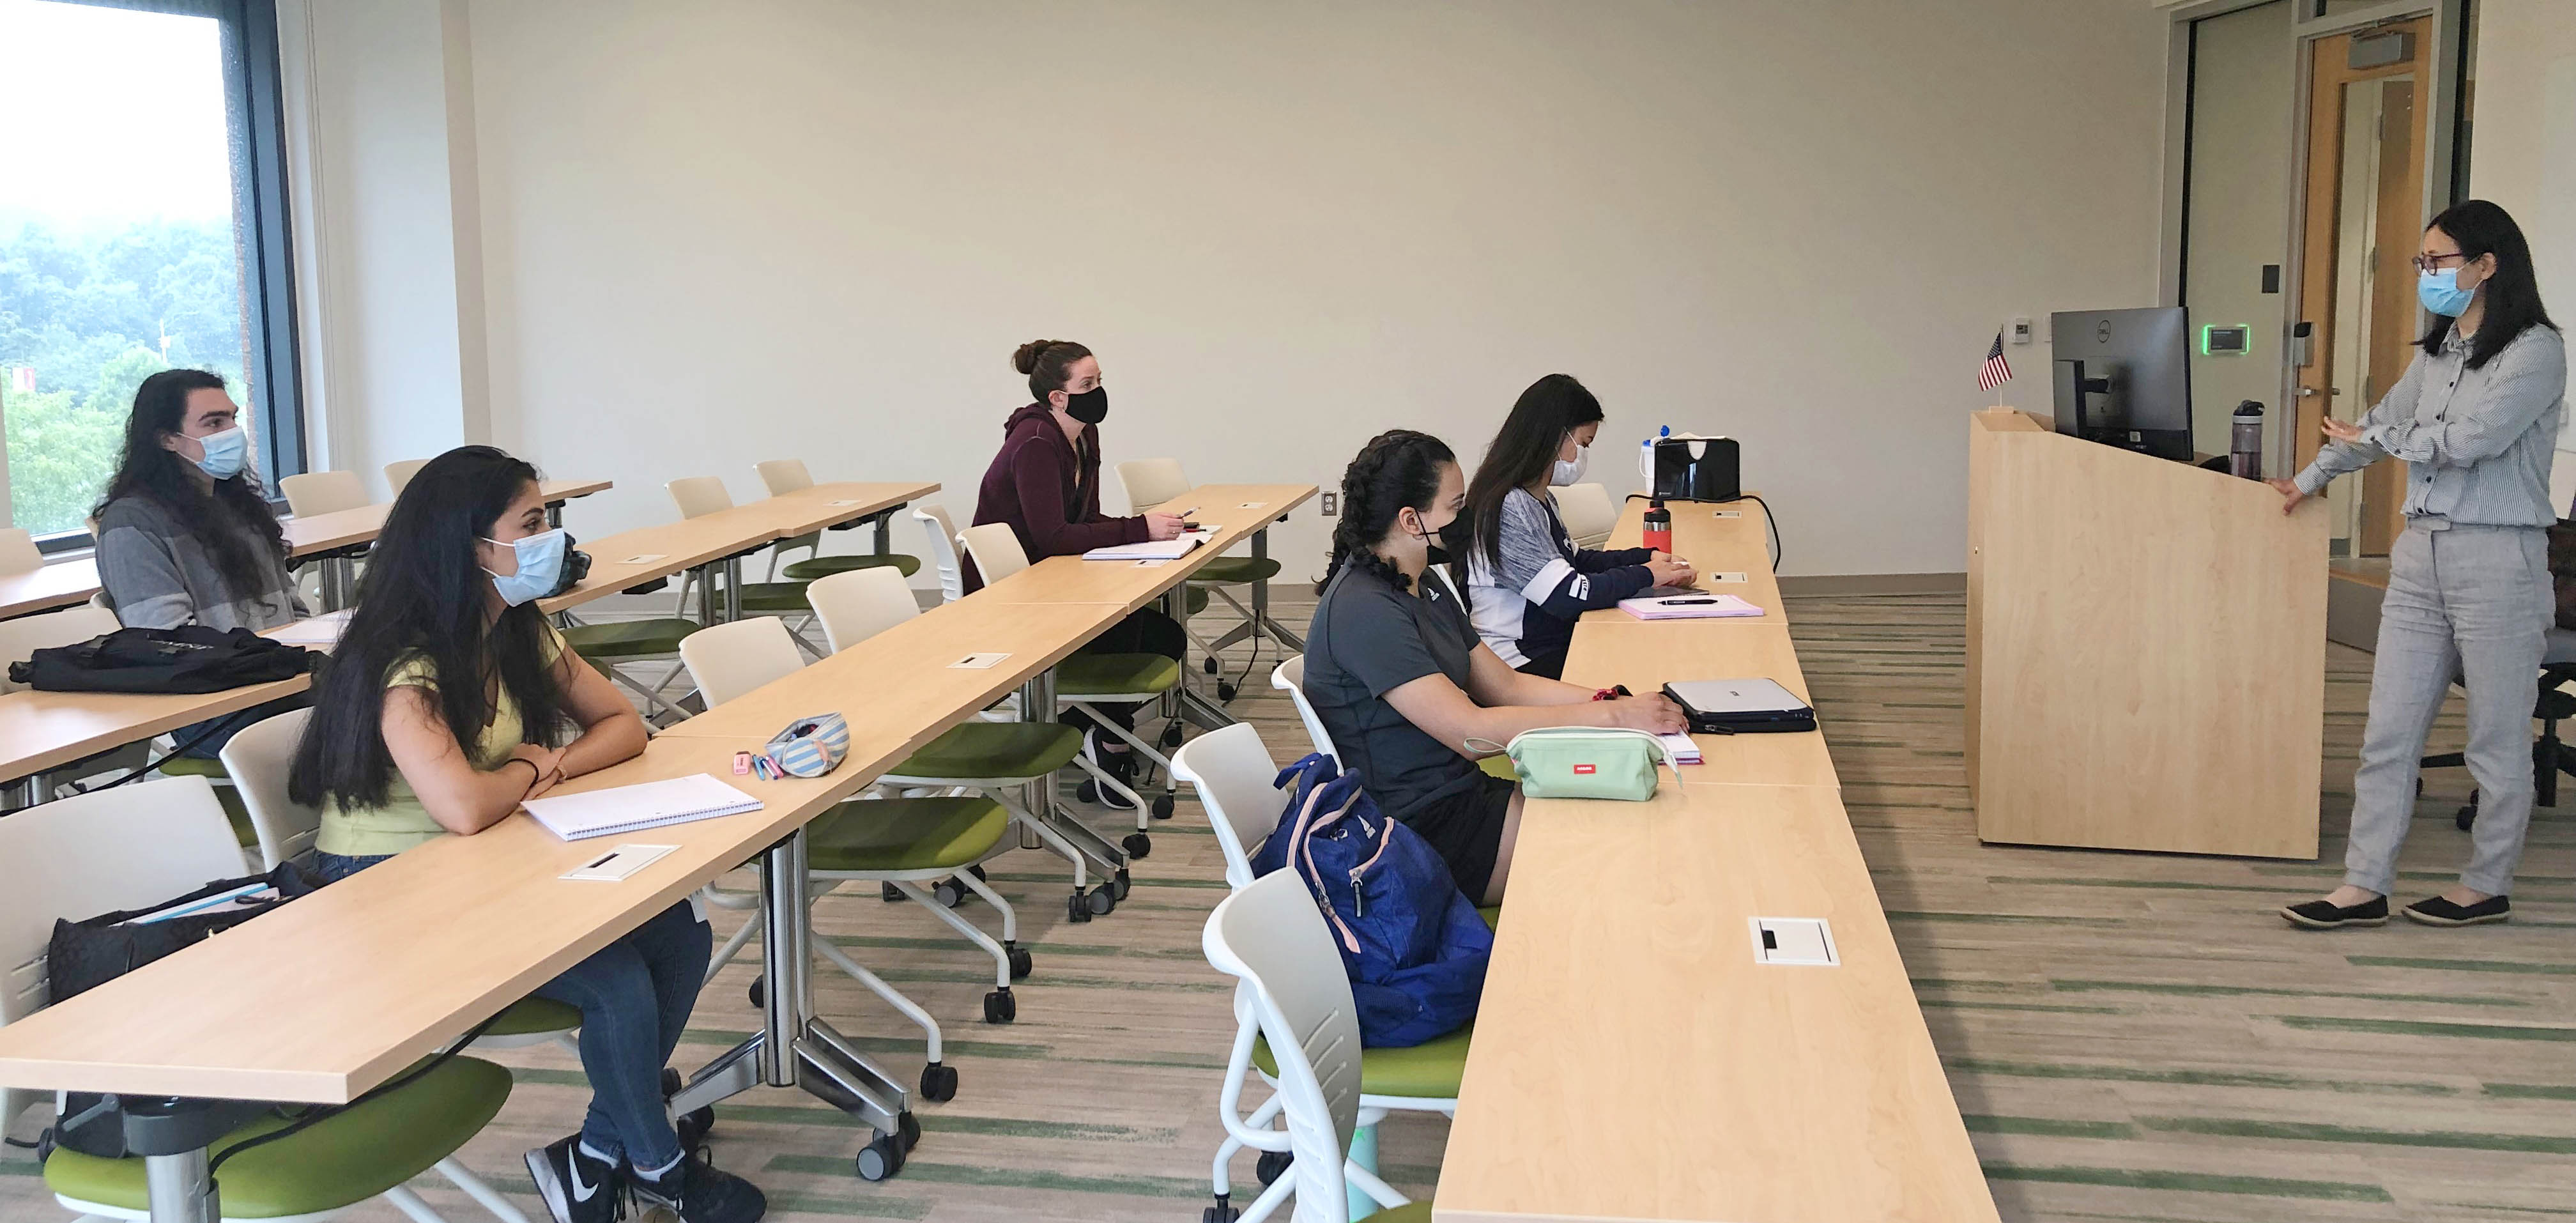 Dr. Lan Ma is pictured (right) at the front of a classroom teaching five students (left) who are taking notes. 